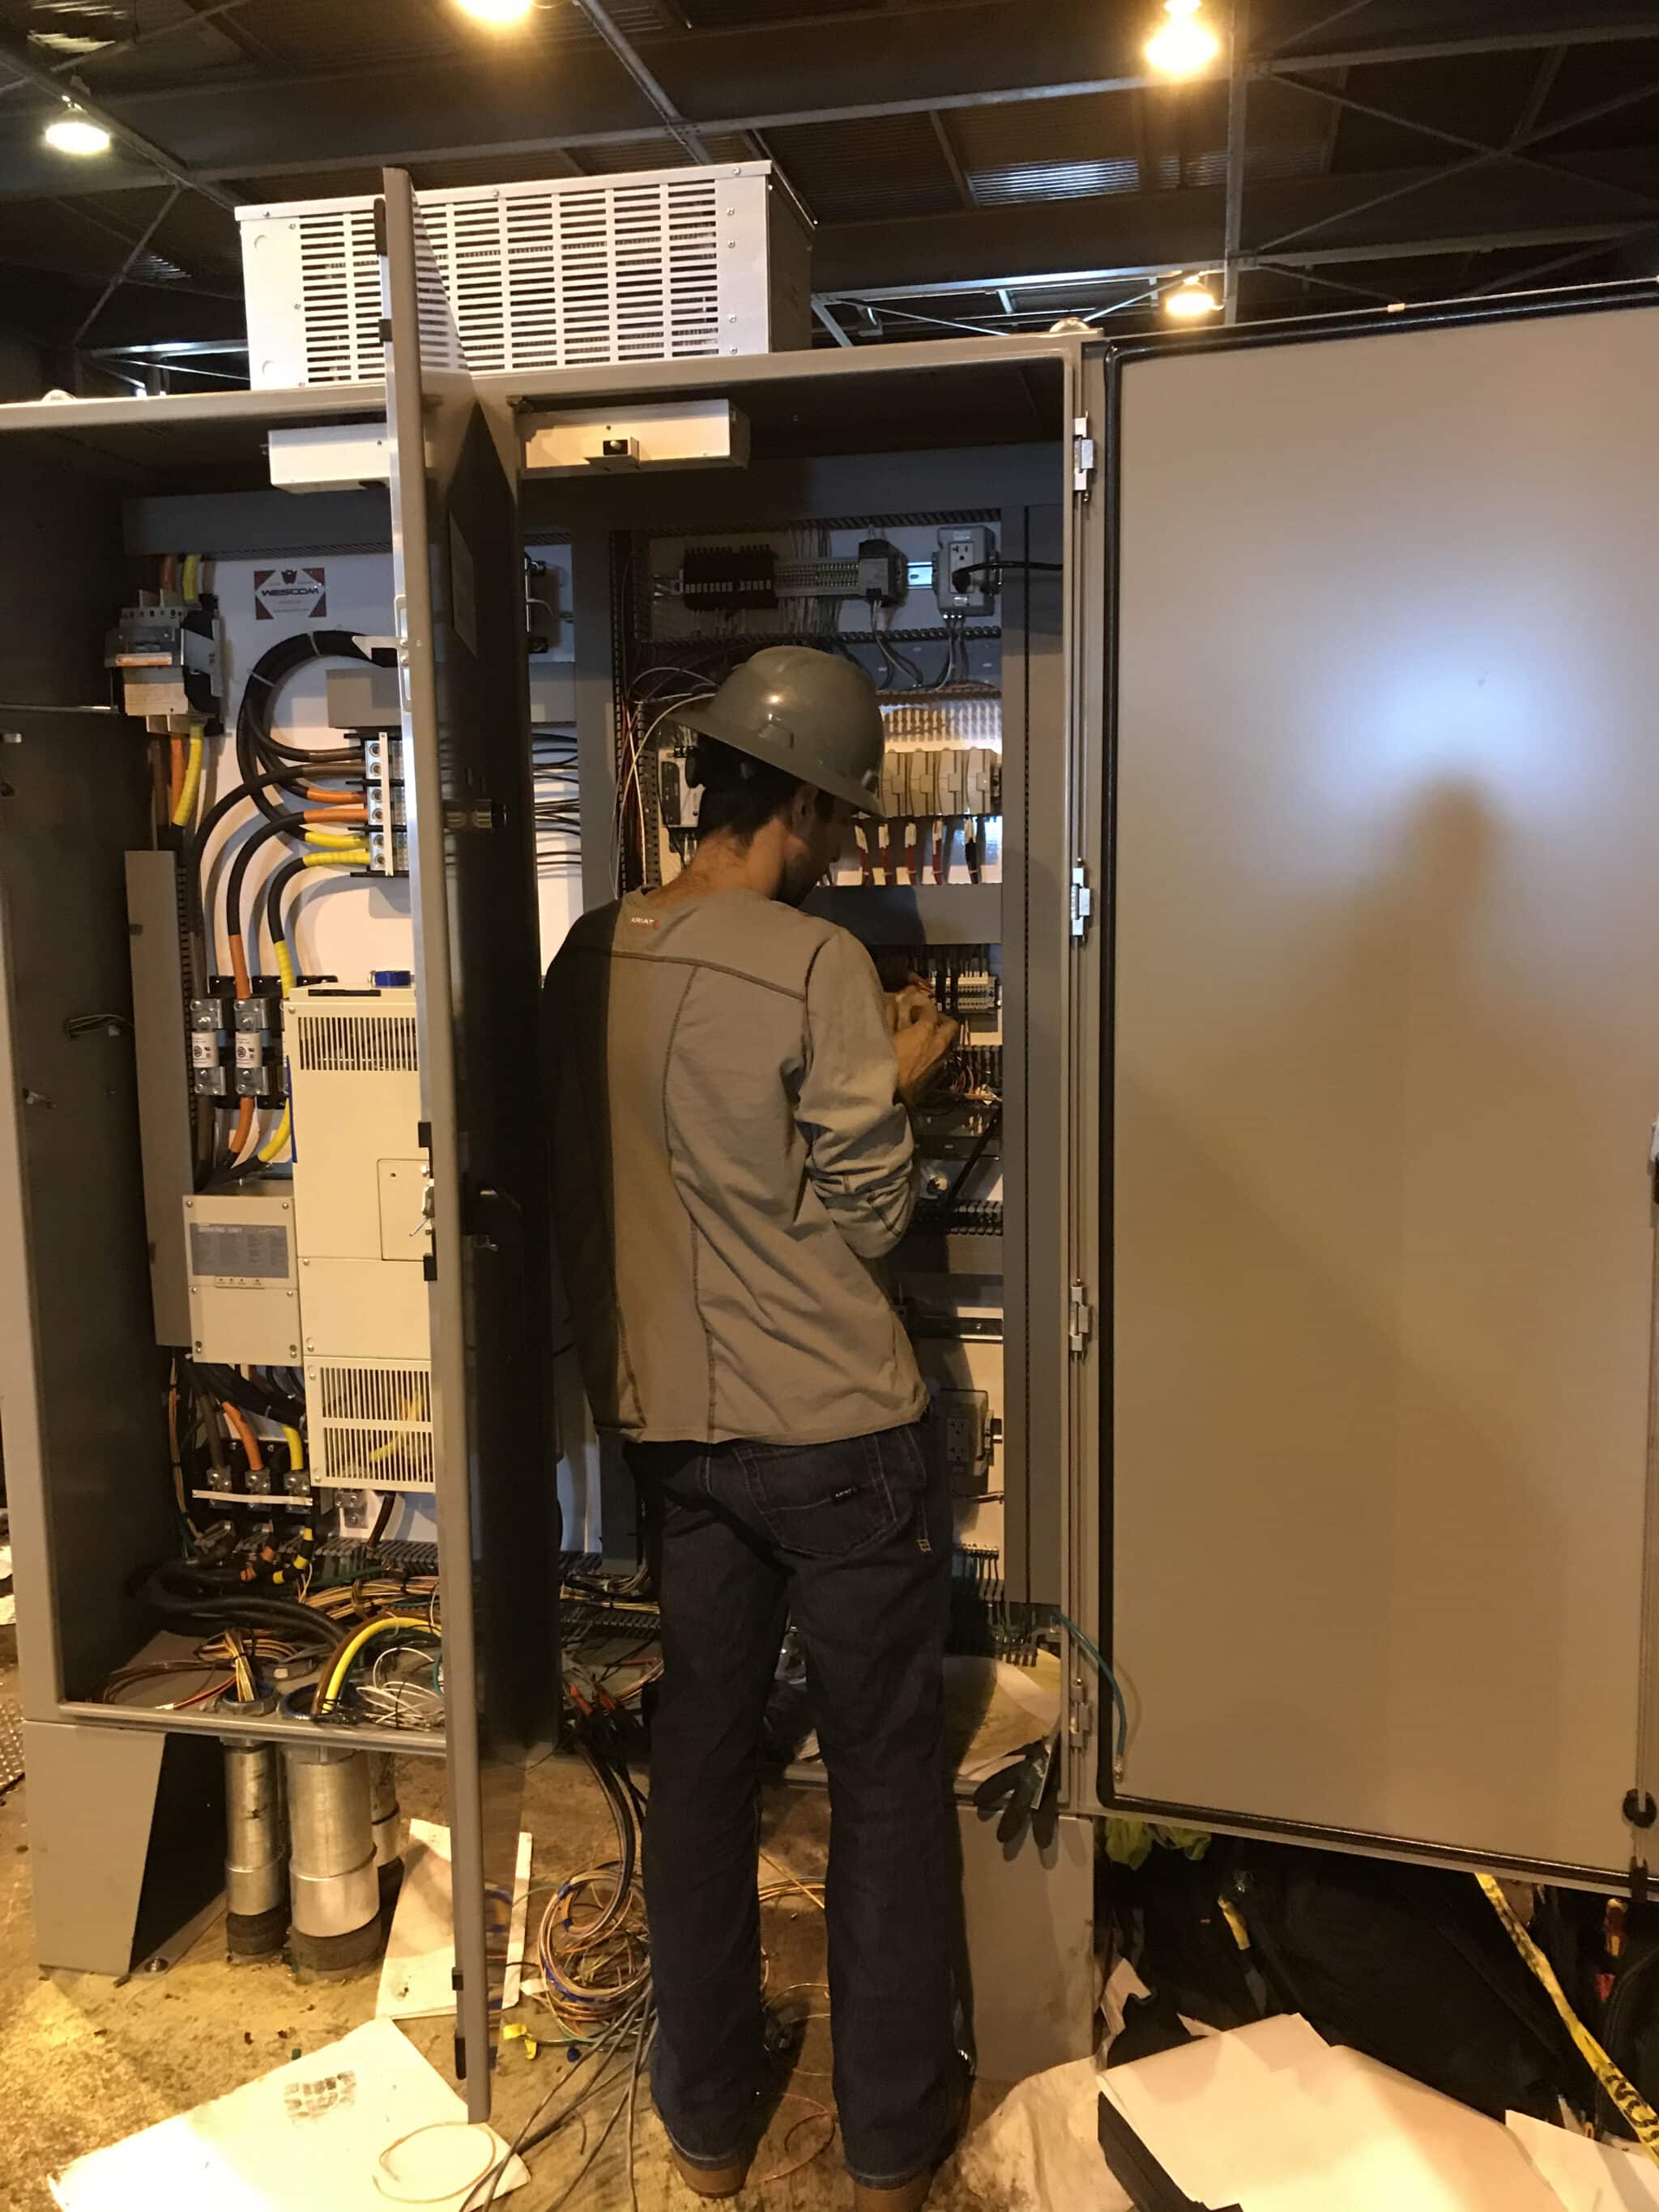 Man working on two electrical boxes